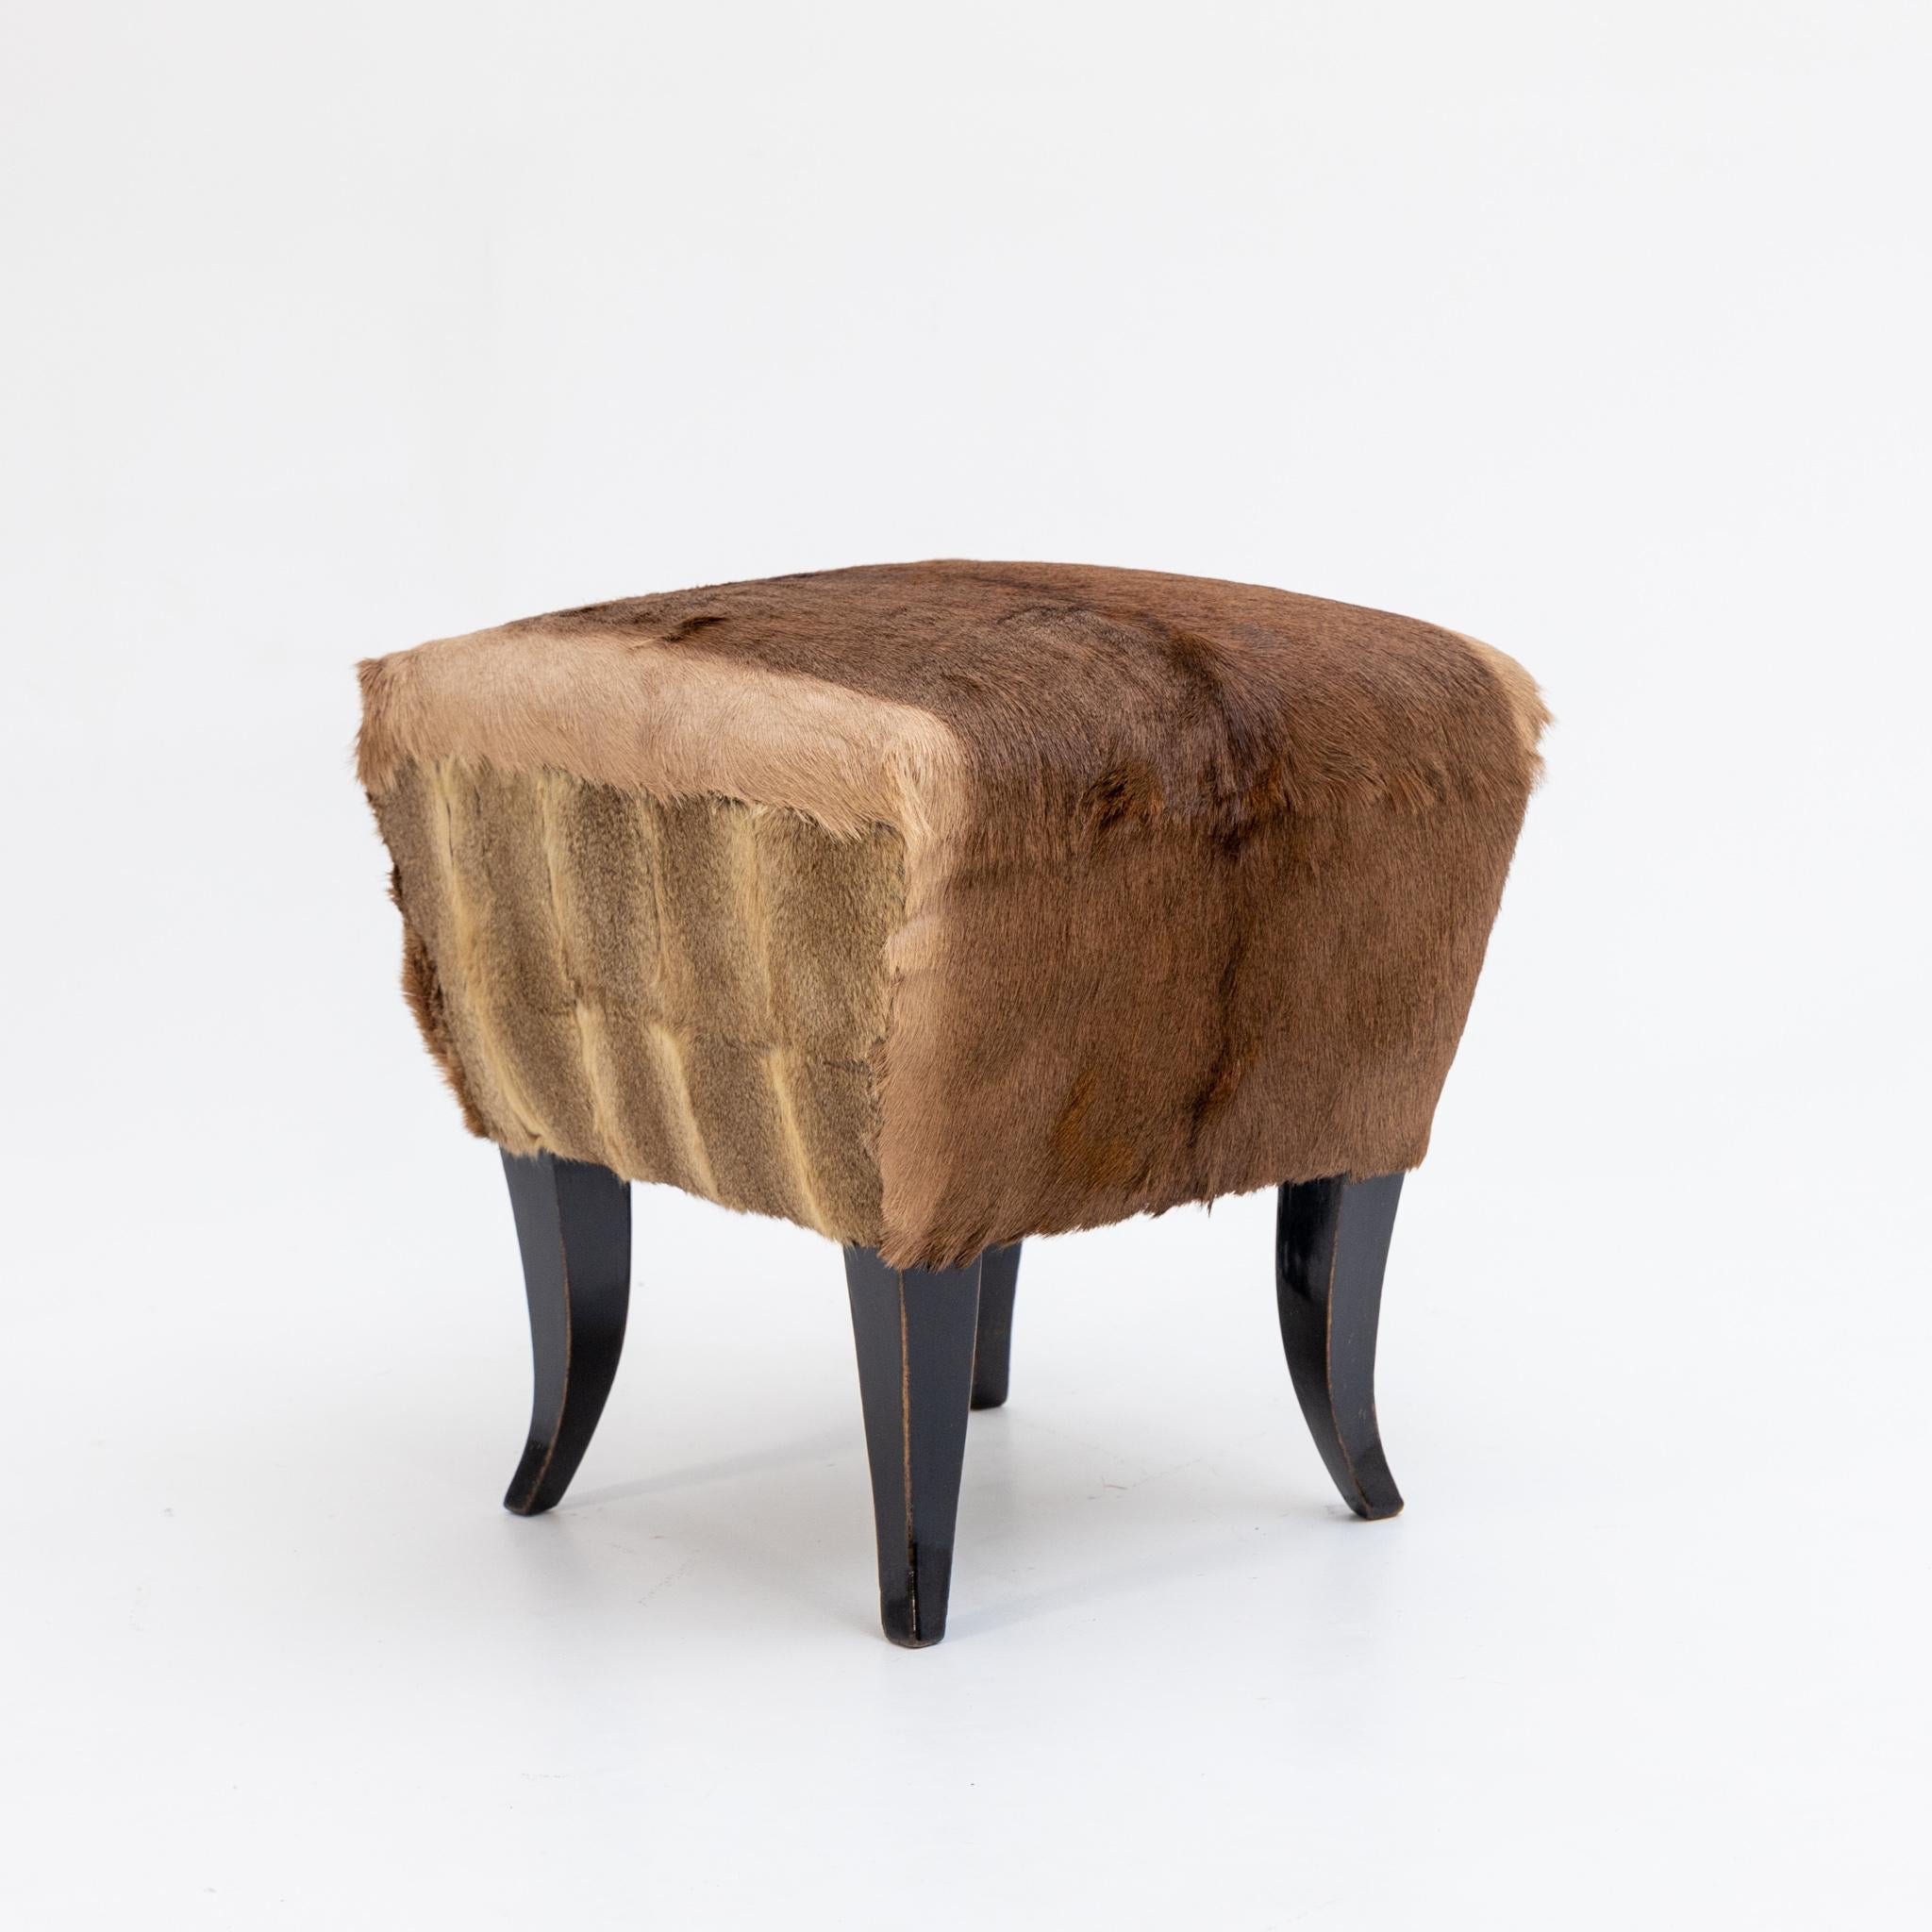 Small fur stool on ebonized wooden frame with brown rabbit fur cover, newly reupholstered.